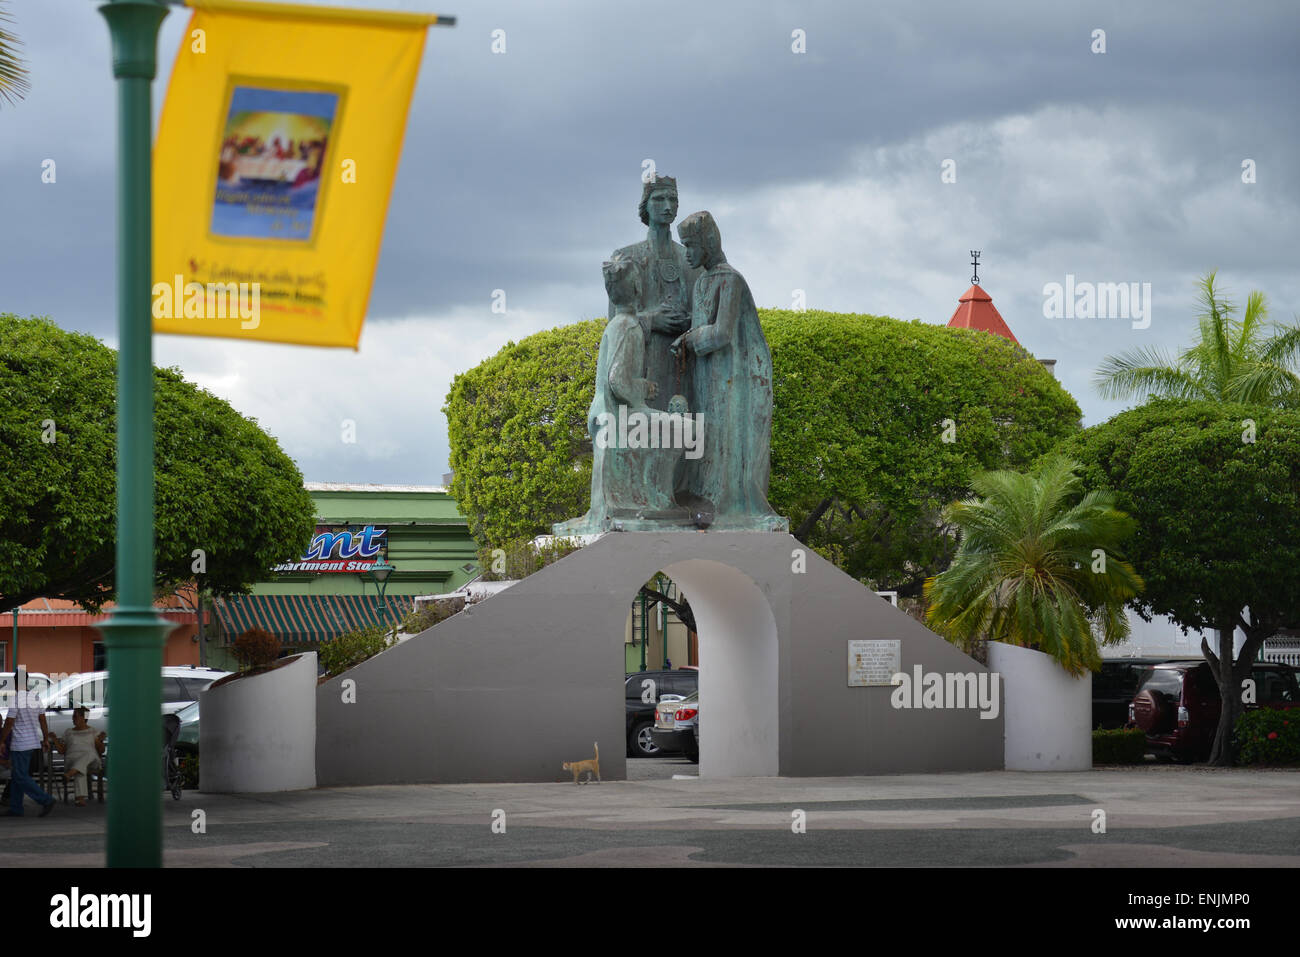 Sculpture of the Three Kings (or Three Wise Man) at the plaza Román Baldorioty de Castro in town of Juana Diaz, Puerto Rico Stock Photo